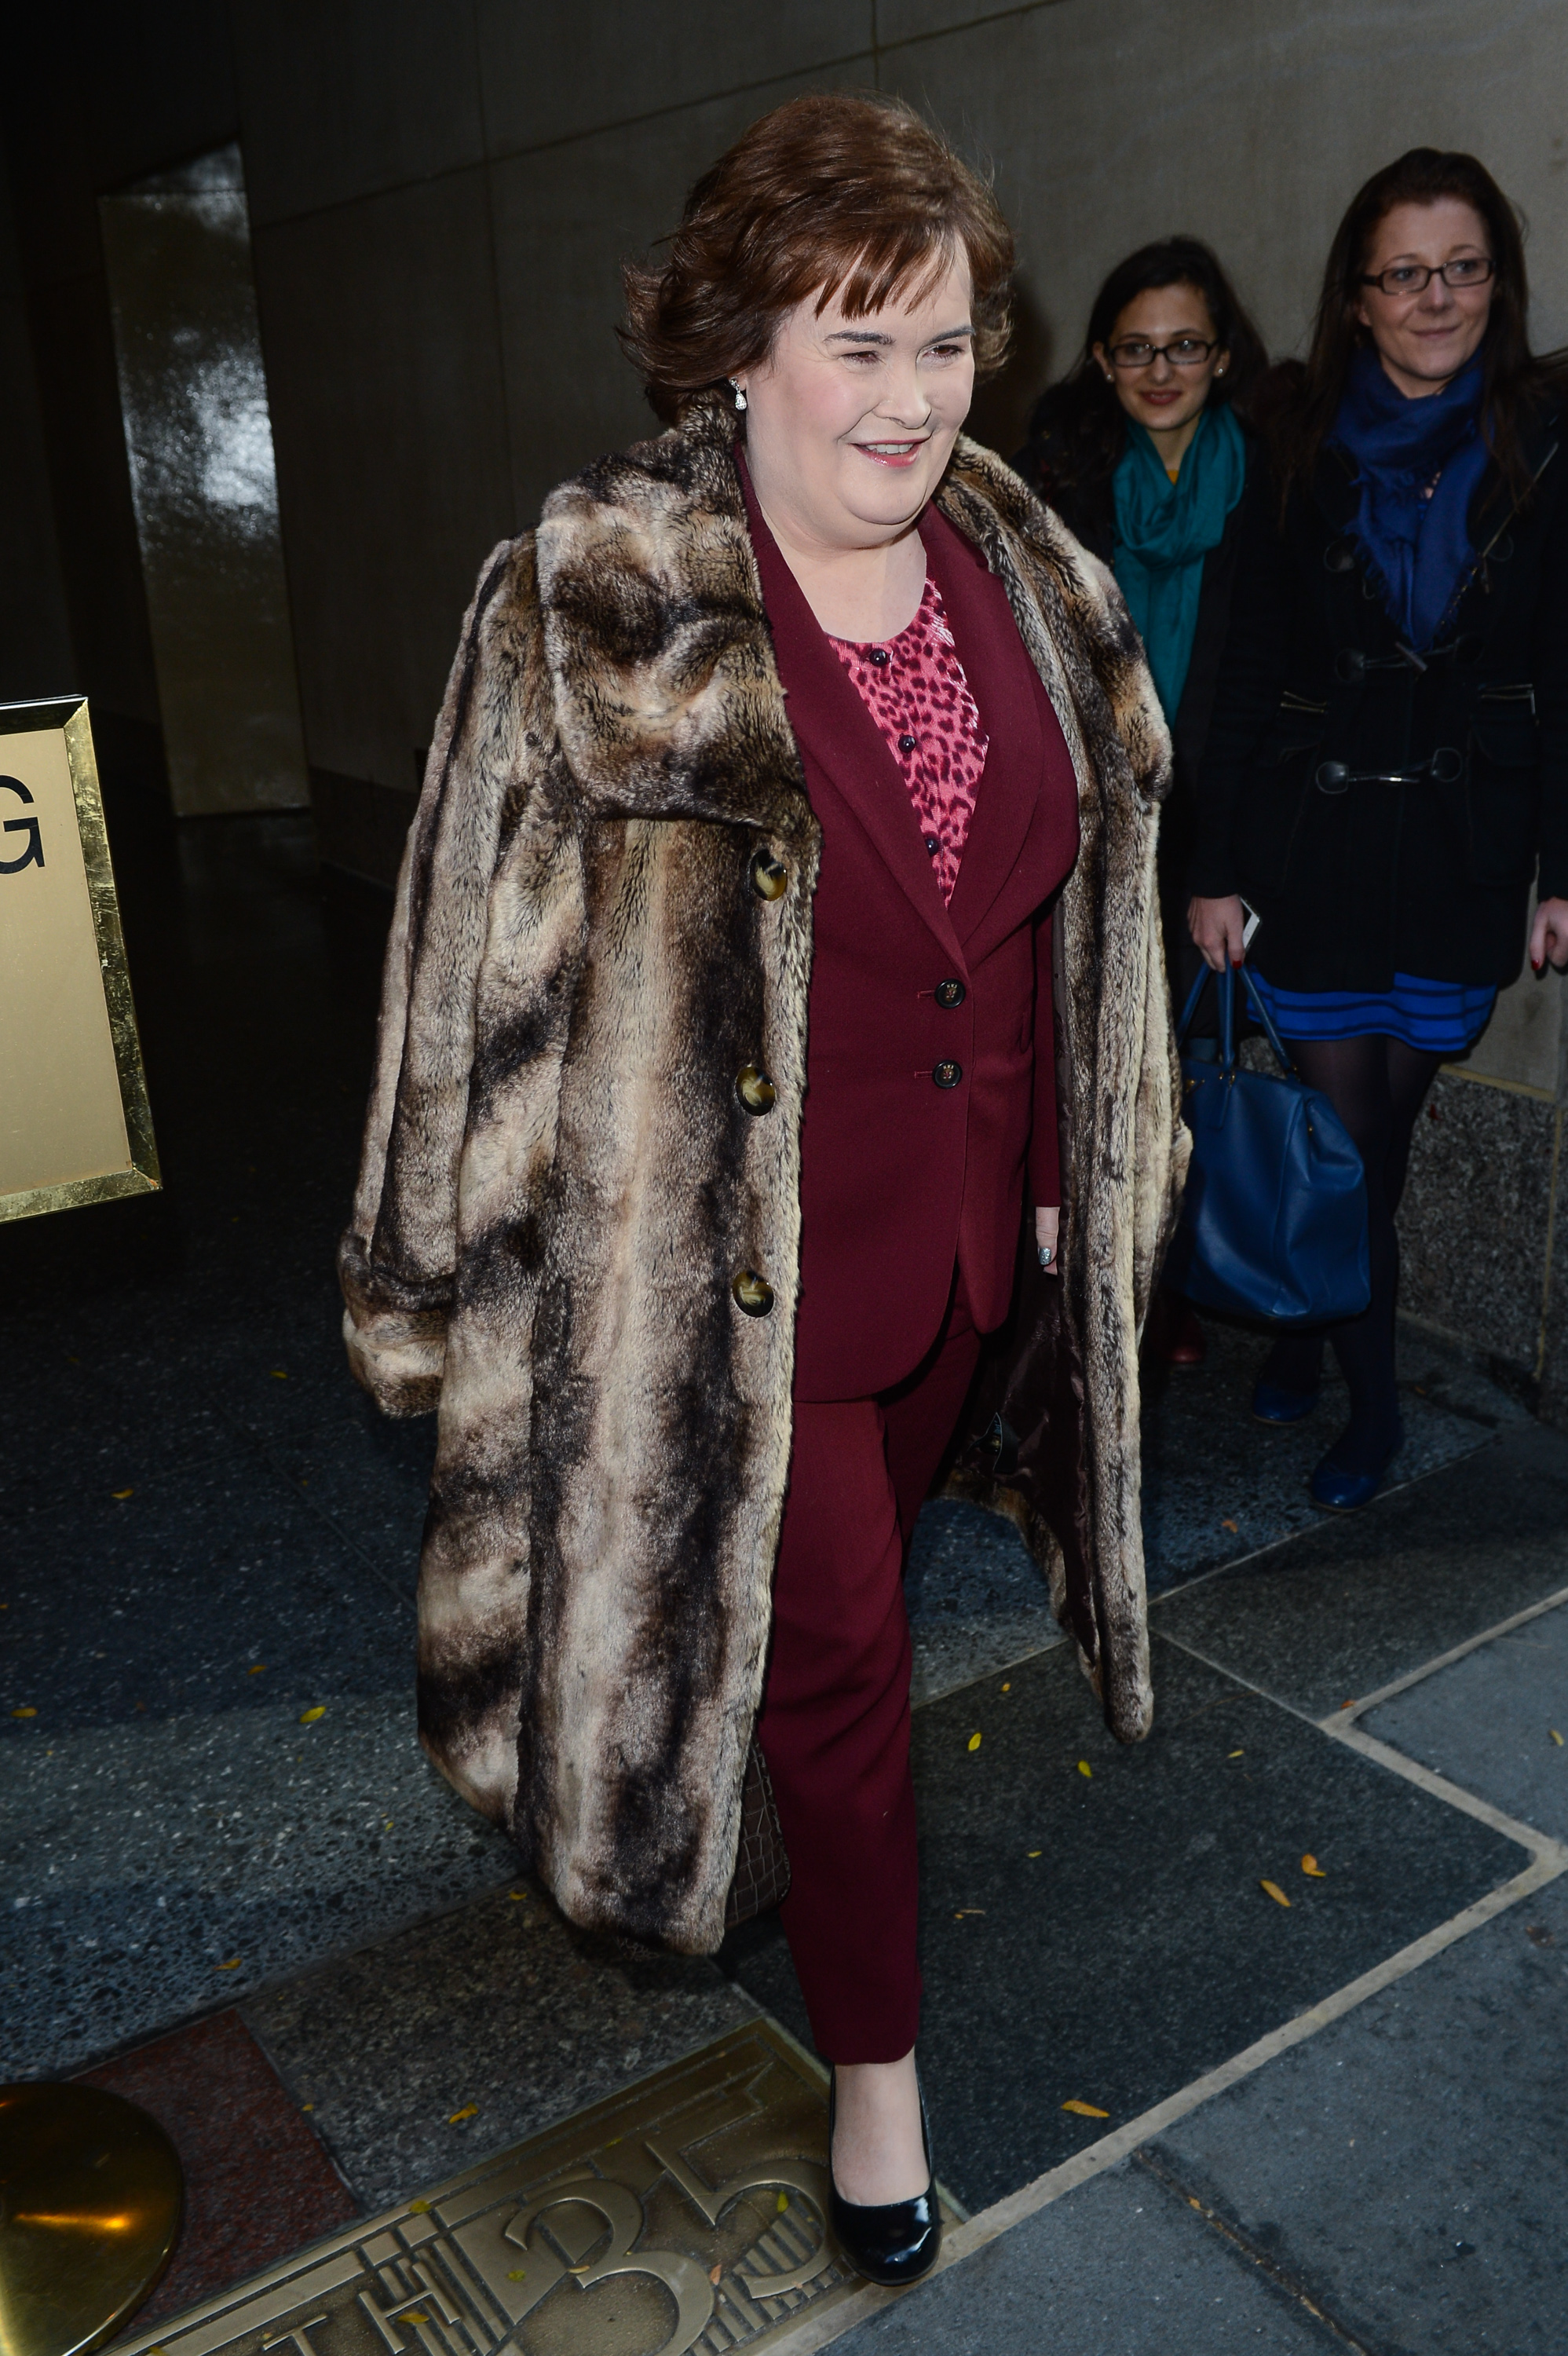 Susan Boyle attends the "Today Show" taping on November 12, 2012 in New York City | Source: Getty Images